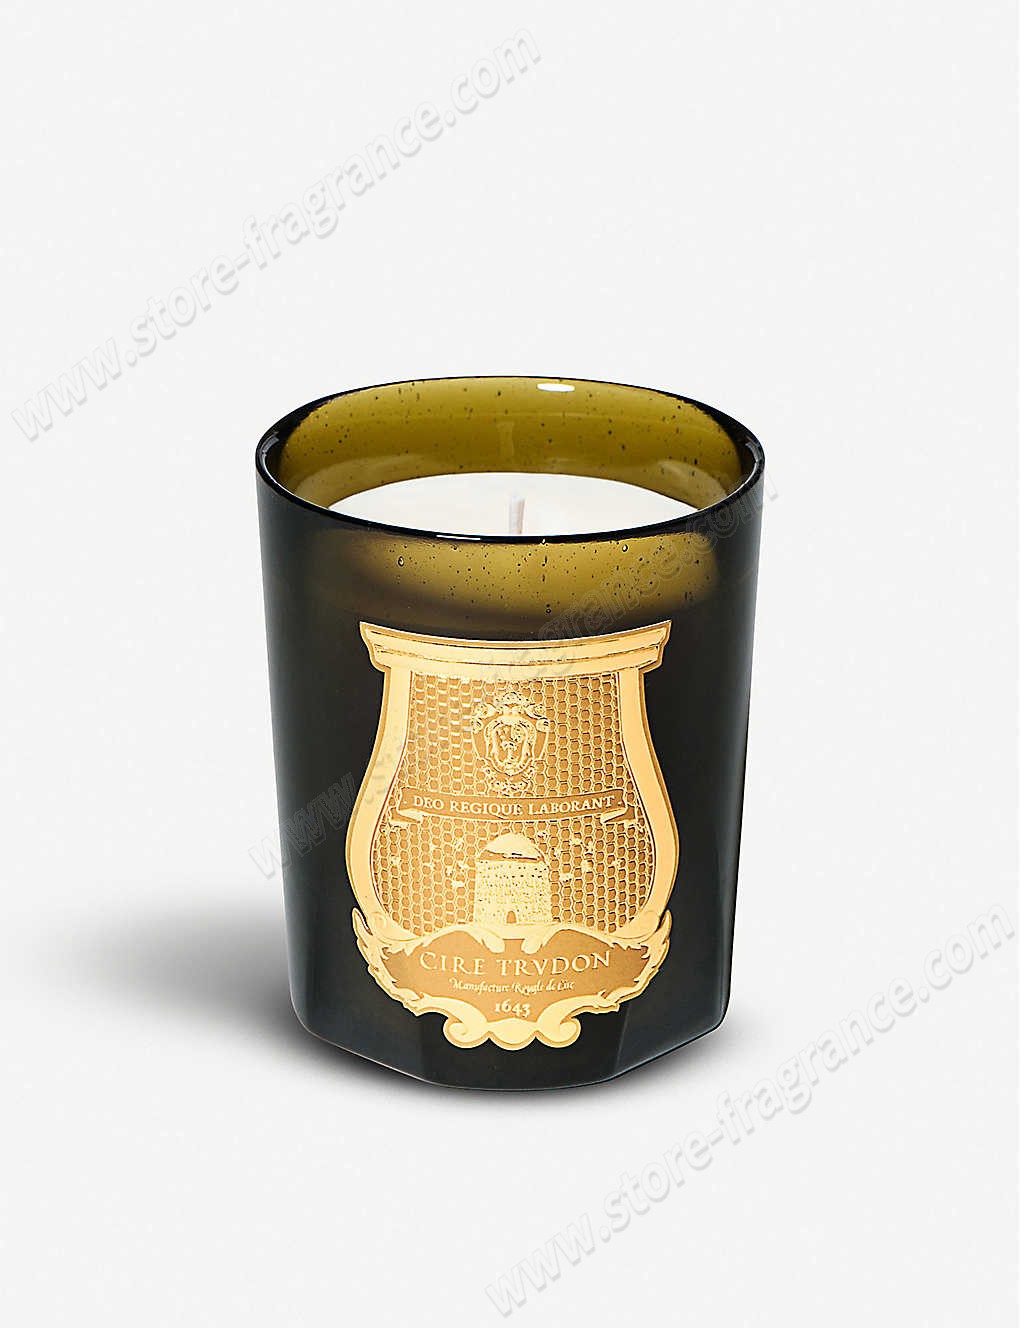 CIRE TRUDON/Abd El Khader scented candle 270g ✿ Discount Store - -1